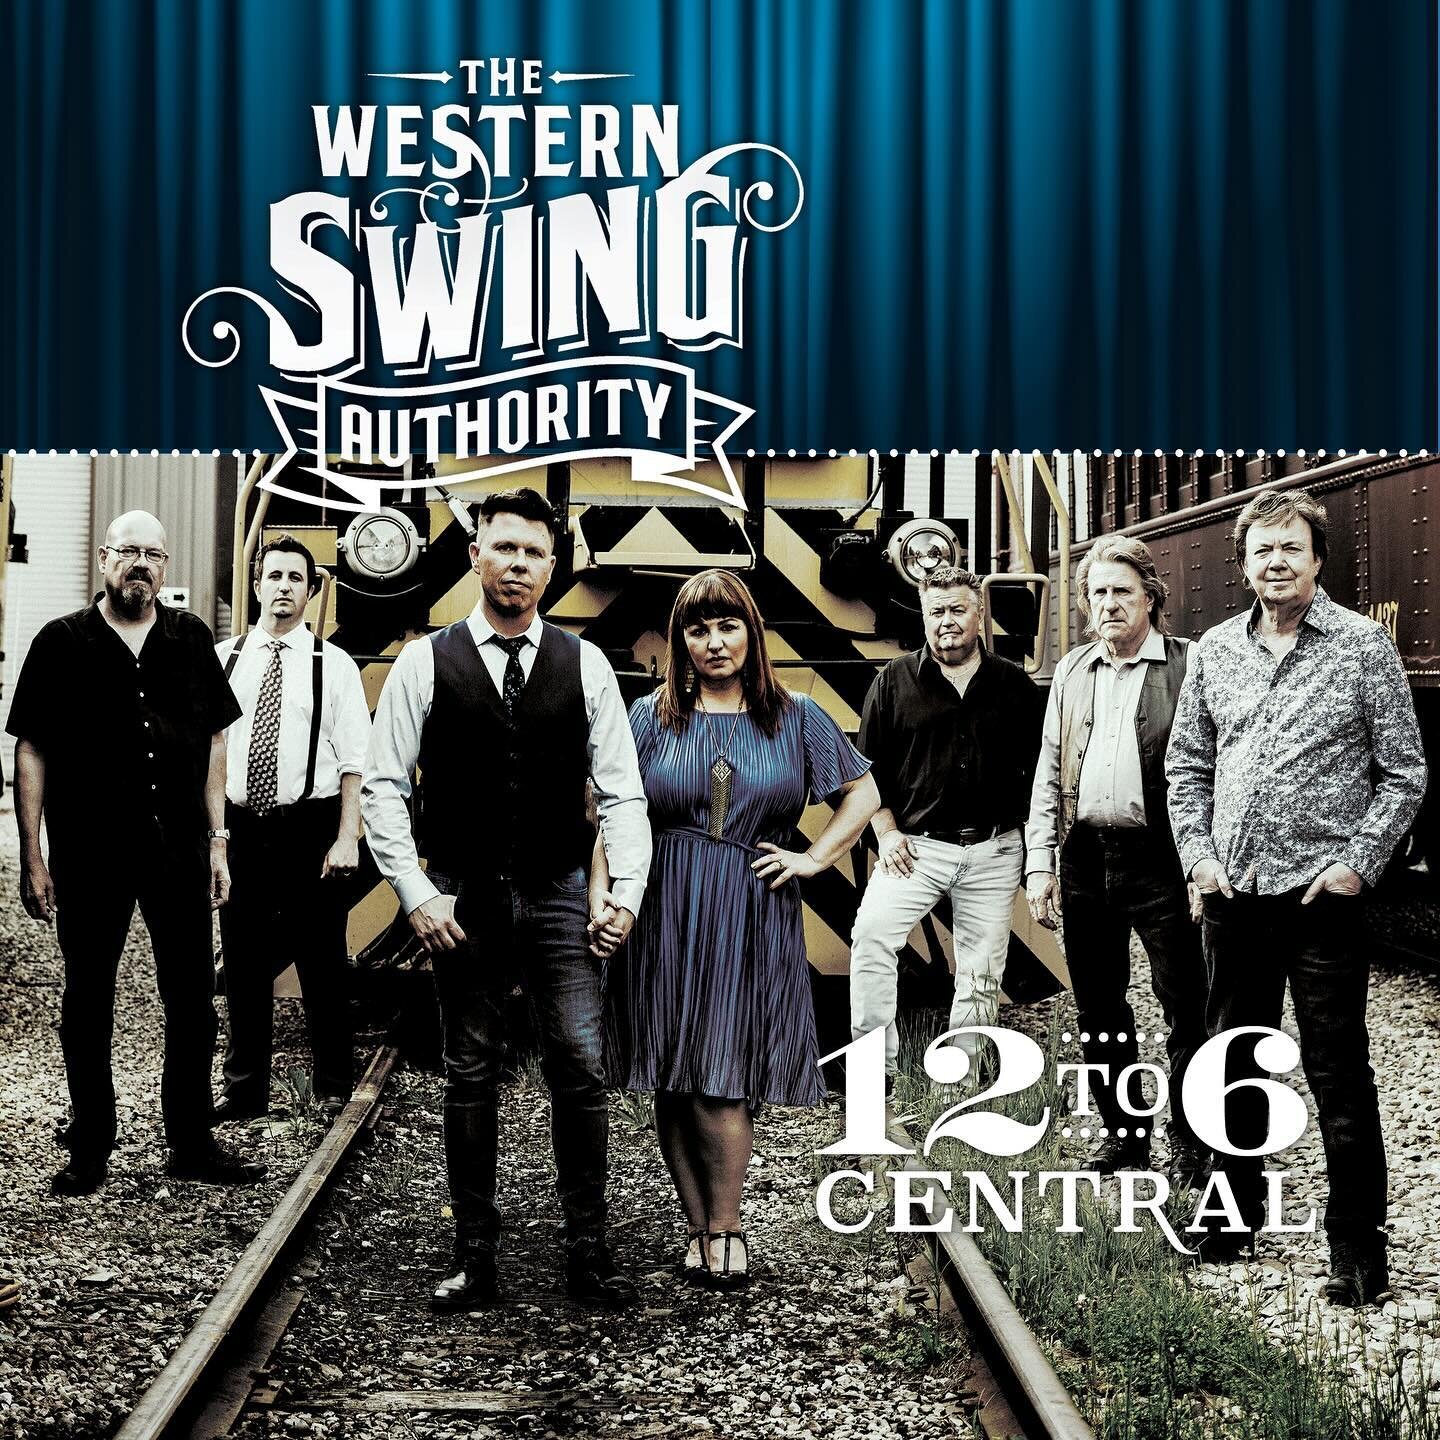 Happy release day to our national treasure of a band!! 
Congratulations to the @westernswingauthority on this masterpiece!